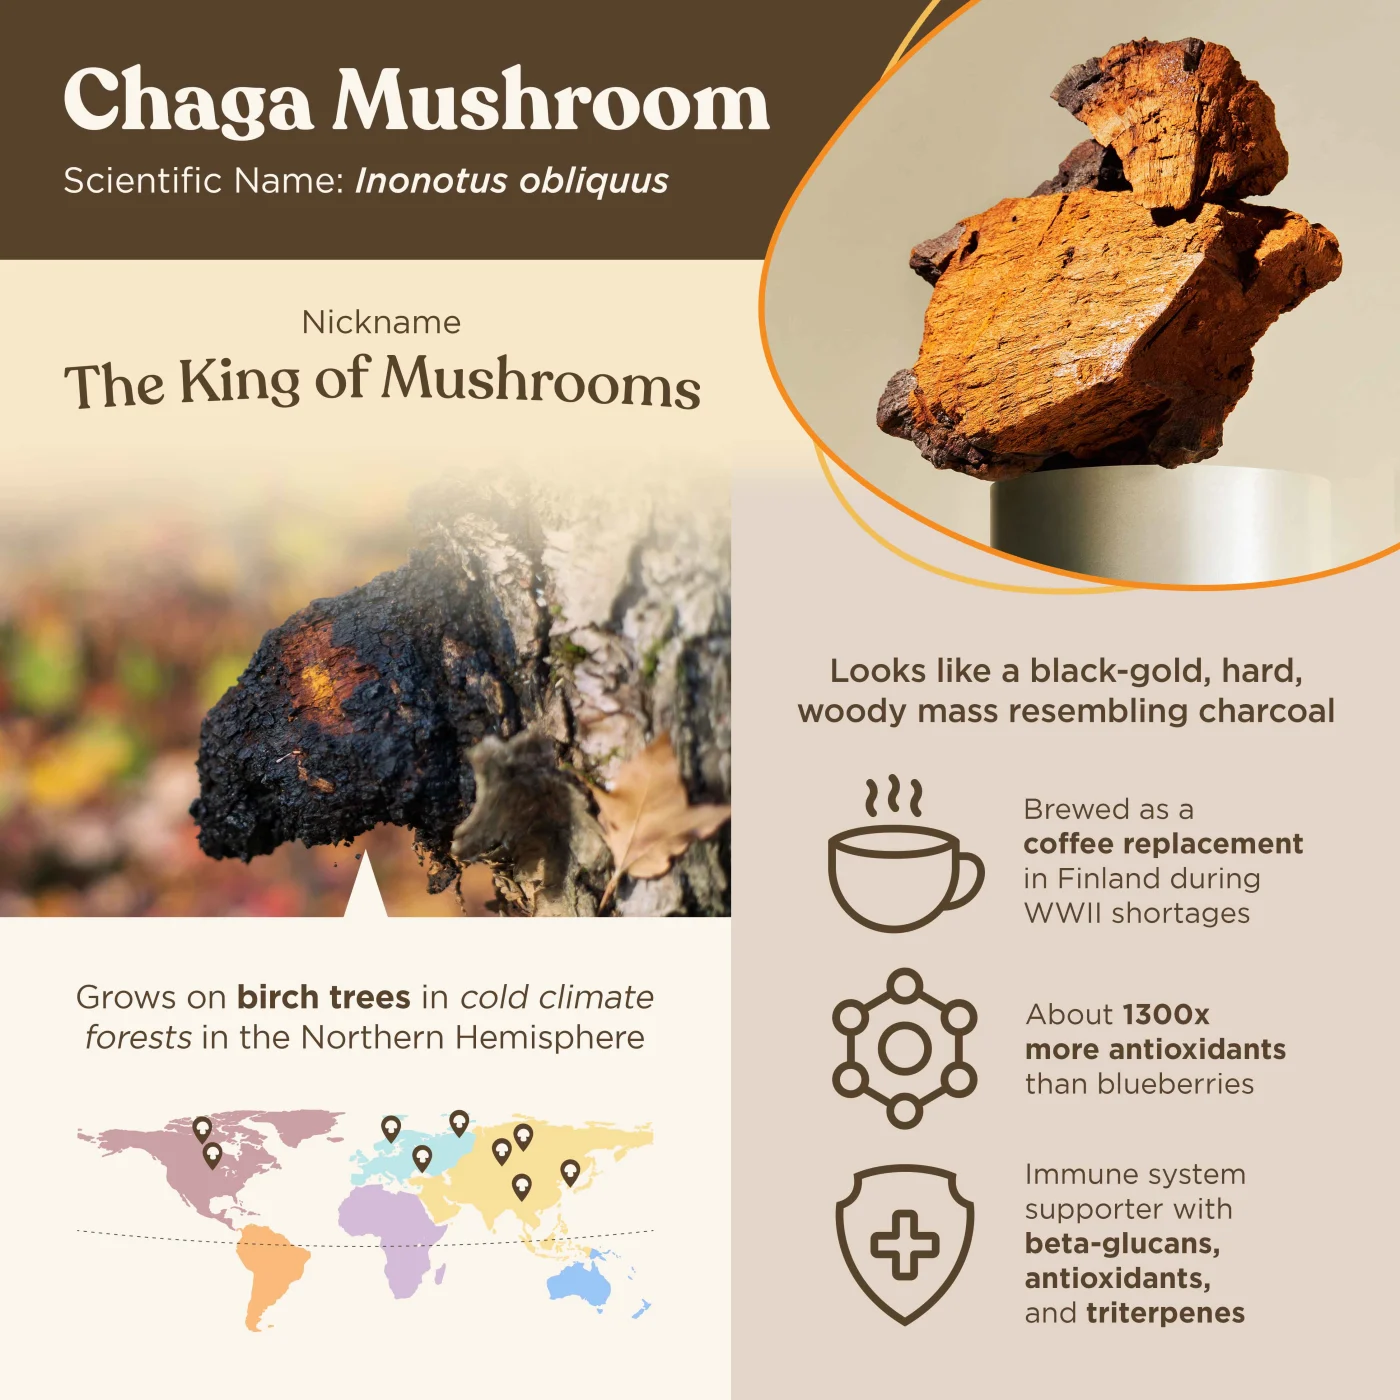 Blog_Image_7_Questions_About_Chaga_Infographic_FINAL.jpg